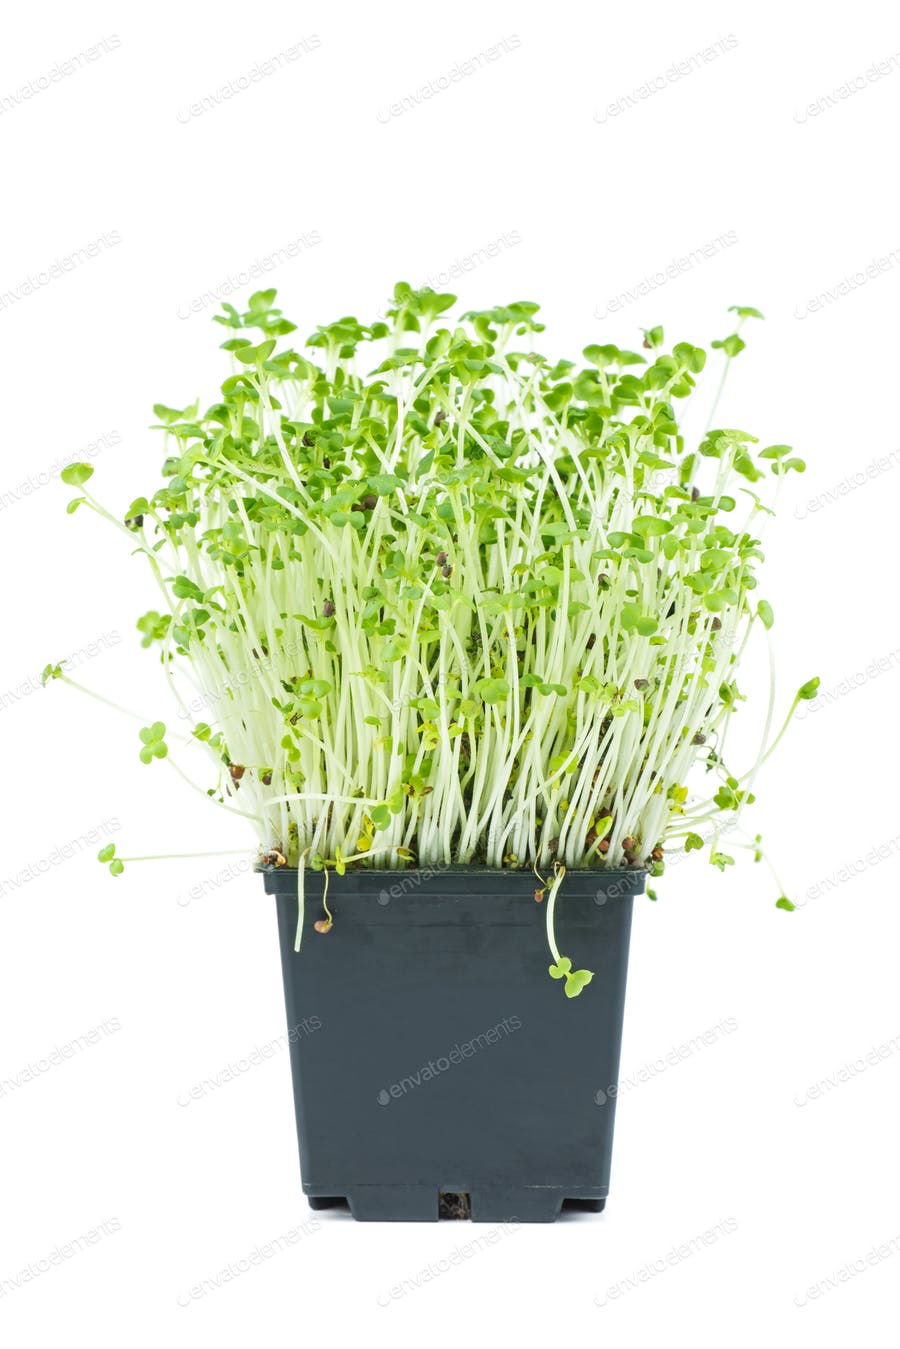 Mustard Sprouts In Black Plastic Pot Isolated On White Background